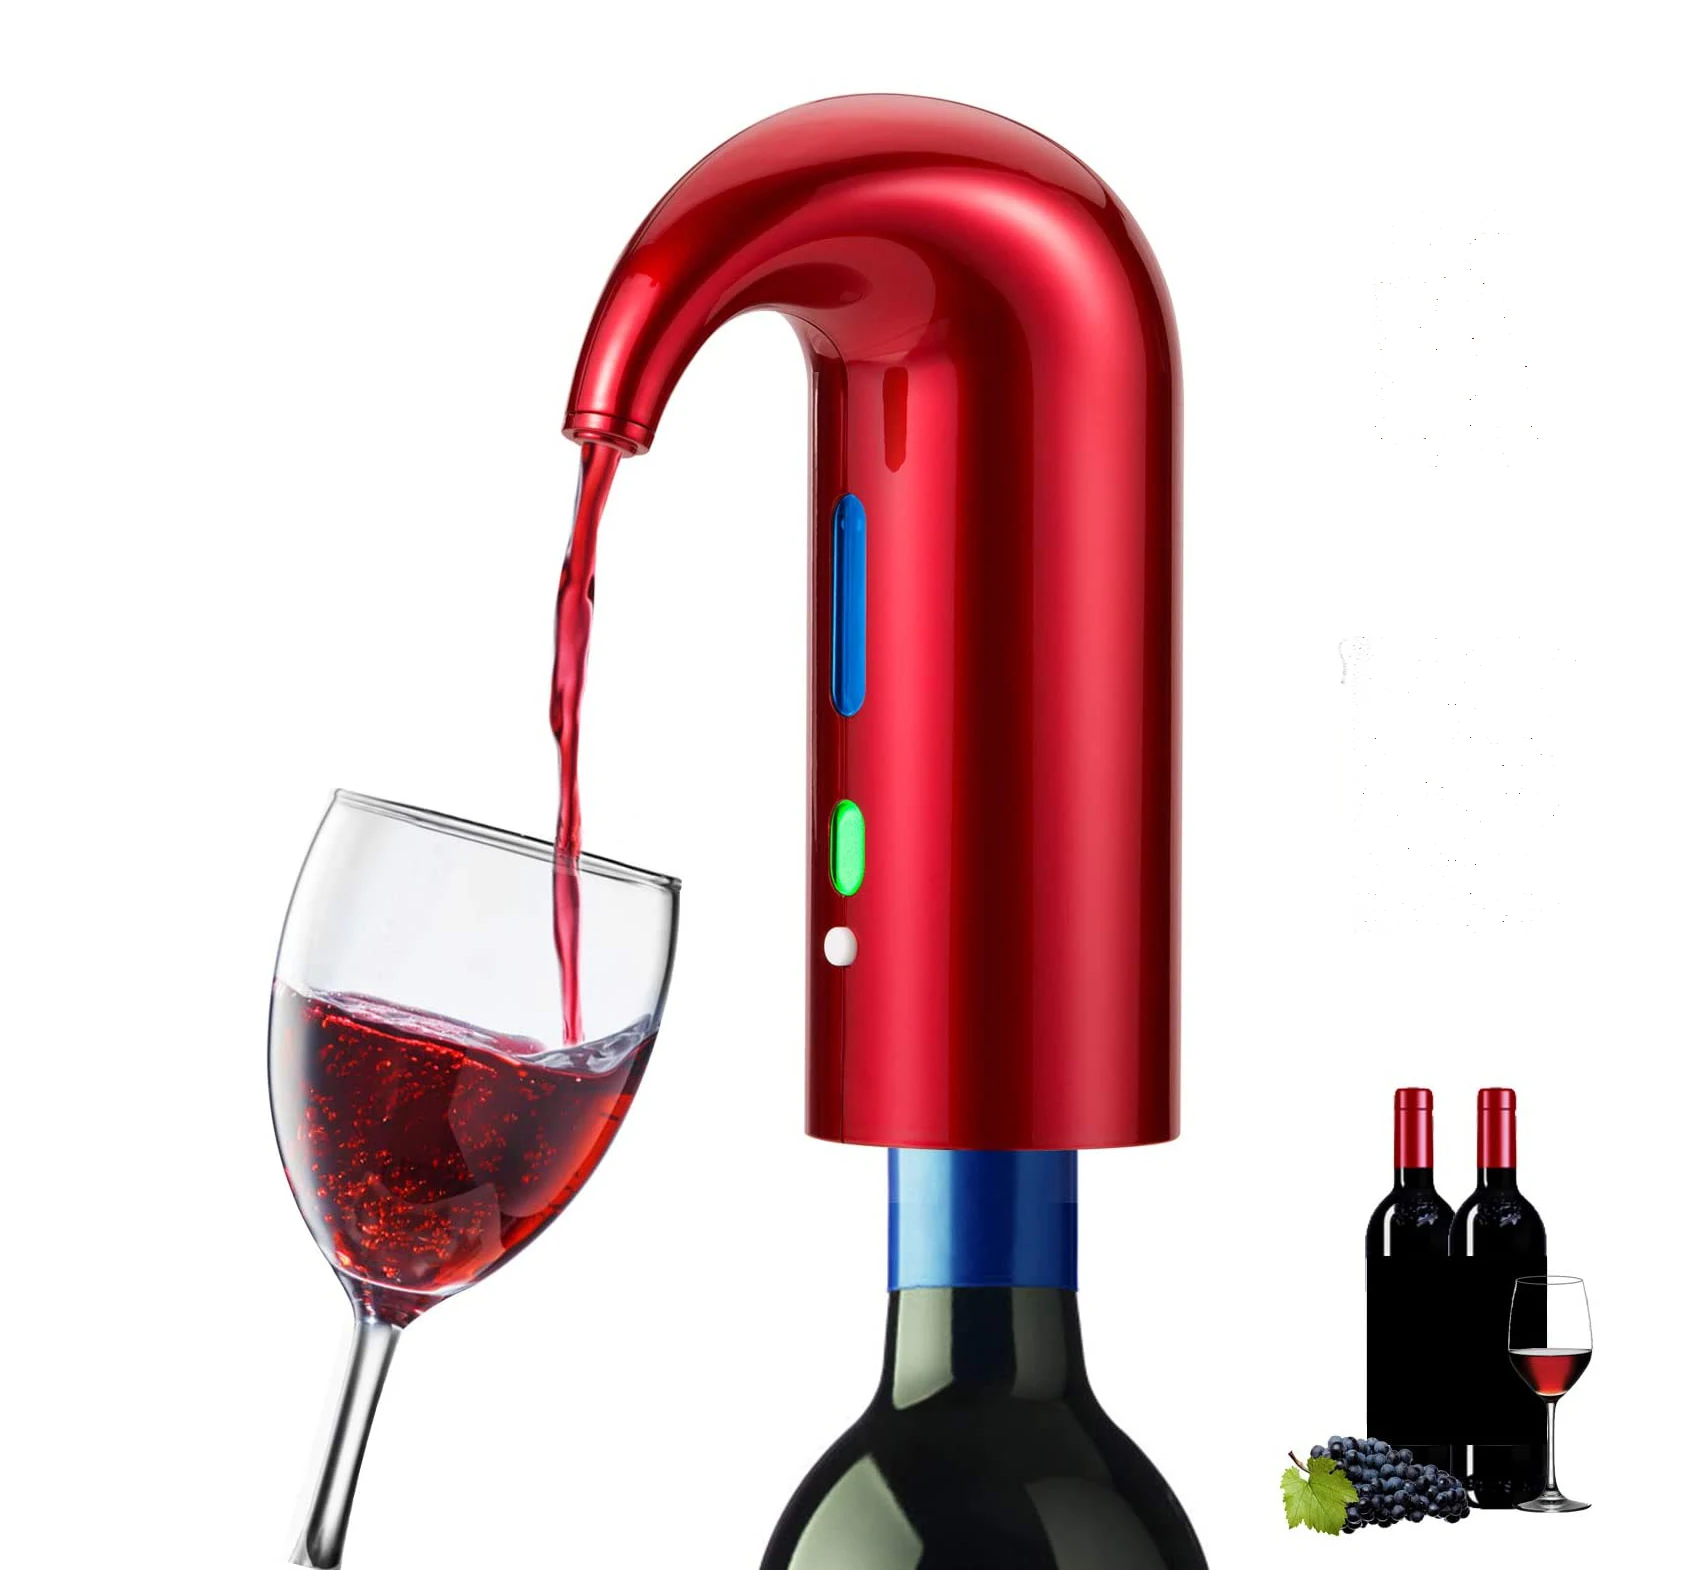 

New Arrivals 2021 Amazon Top Seller Luxury Electronic Gadget USB Rechargeable Automatic Electric Wine Aerator Pump Rechargeable, Red, black, white